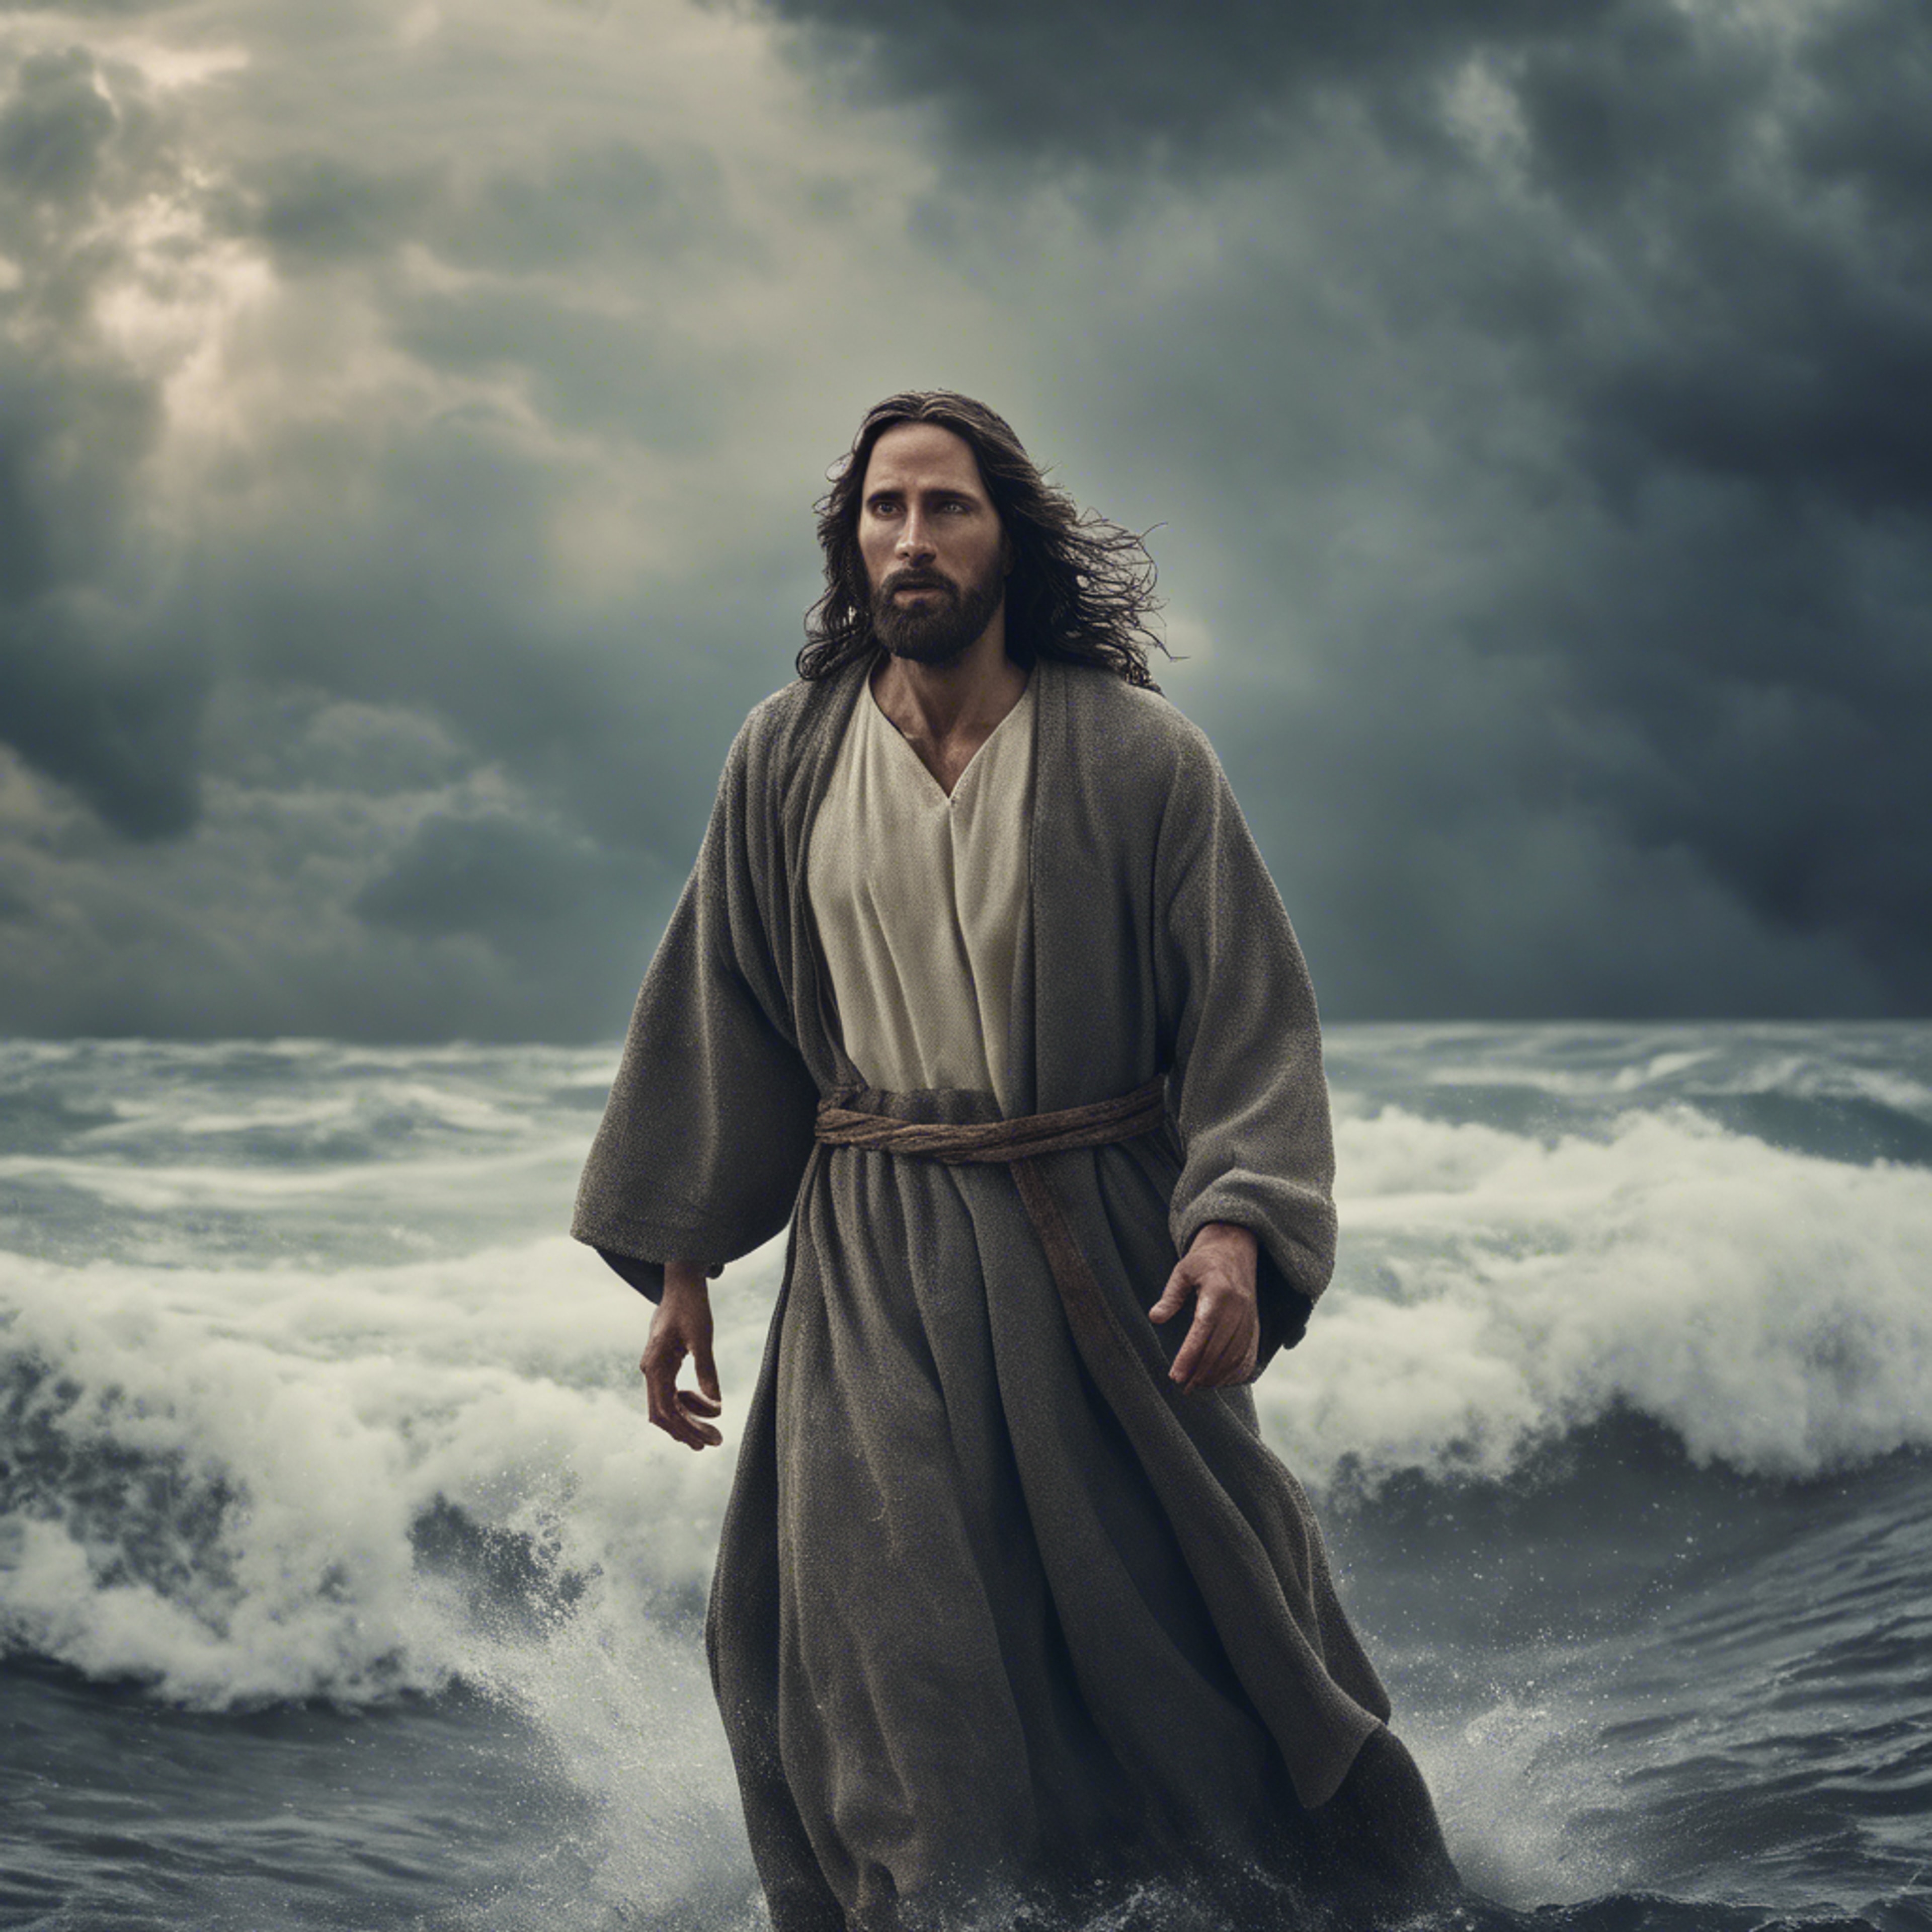 Jesus Christ calmly walking across a stormy sea under a dramatic, cloudy sky. 墙纸[40d9c306725247569090]